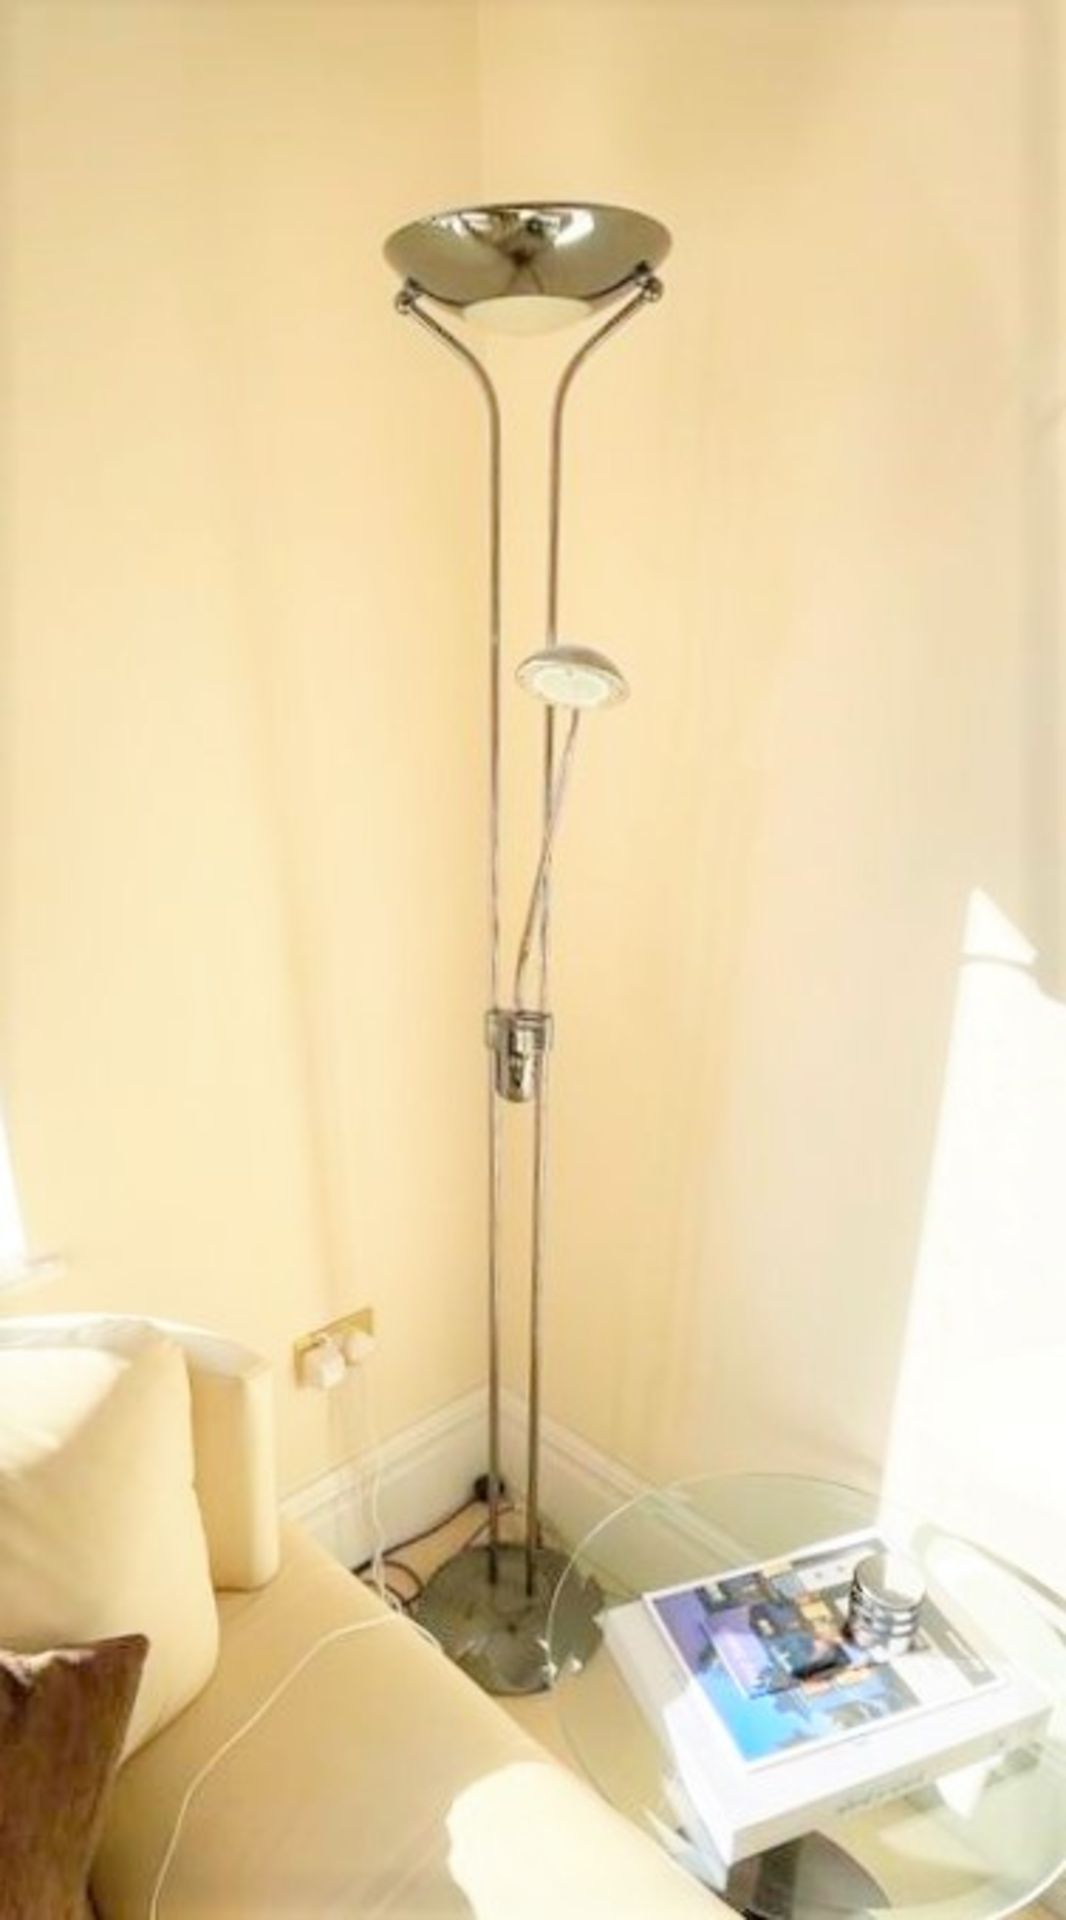 1 x Chrome Floor Lamp With Uplight and Reading Light - Approx Height 6ft - NO VAT ON THE HAMMER - - Image 2 of 3